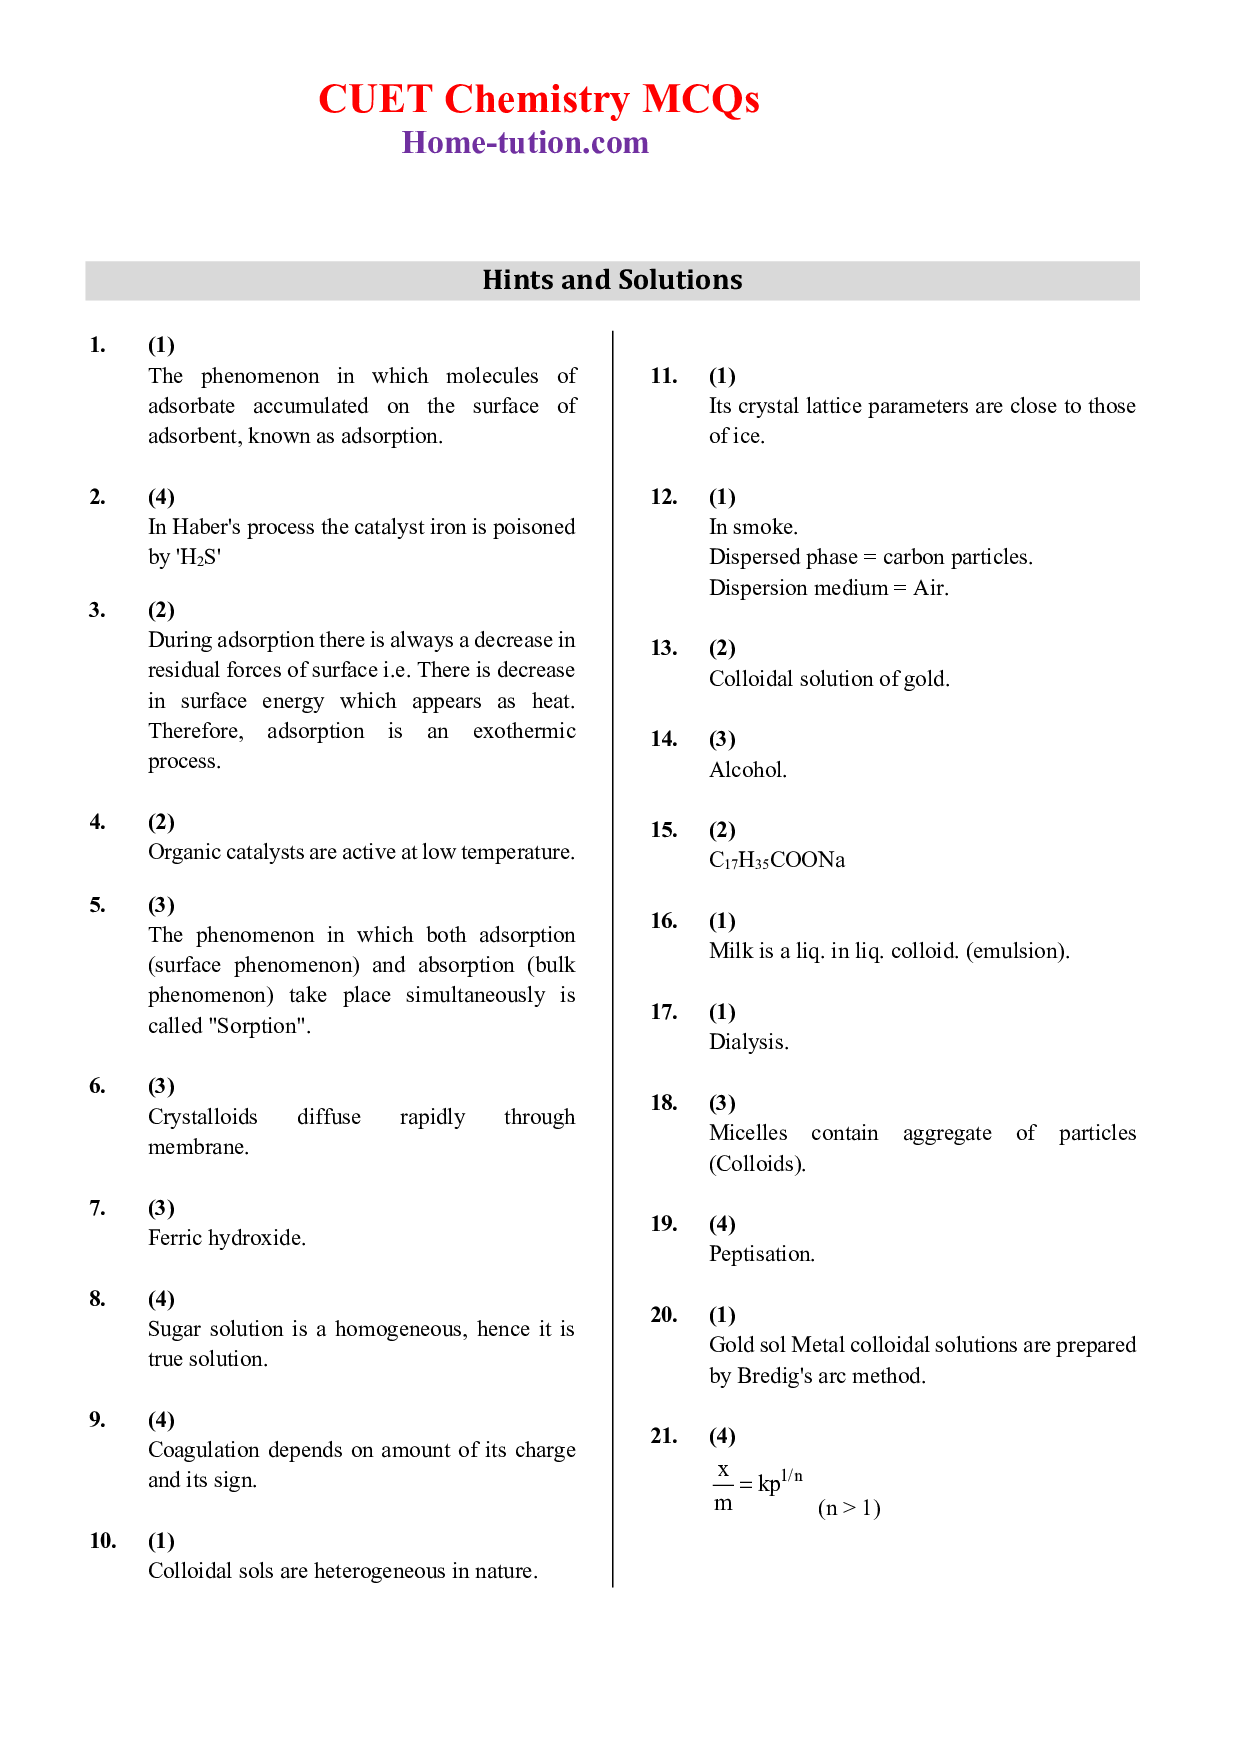 CUET MCQ Questions For Chapter-05 Surface Chemistry